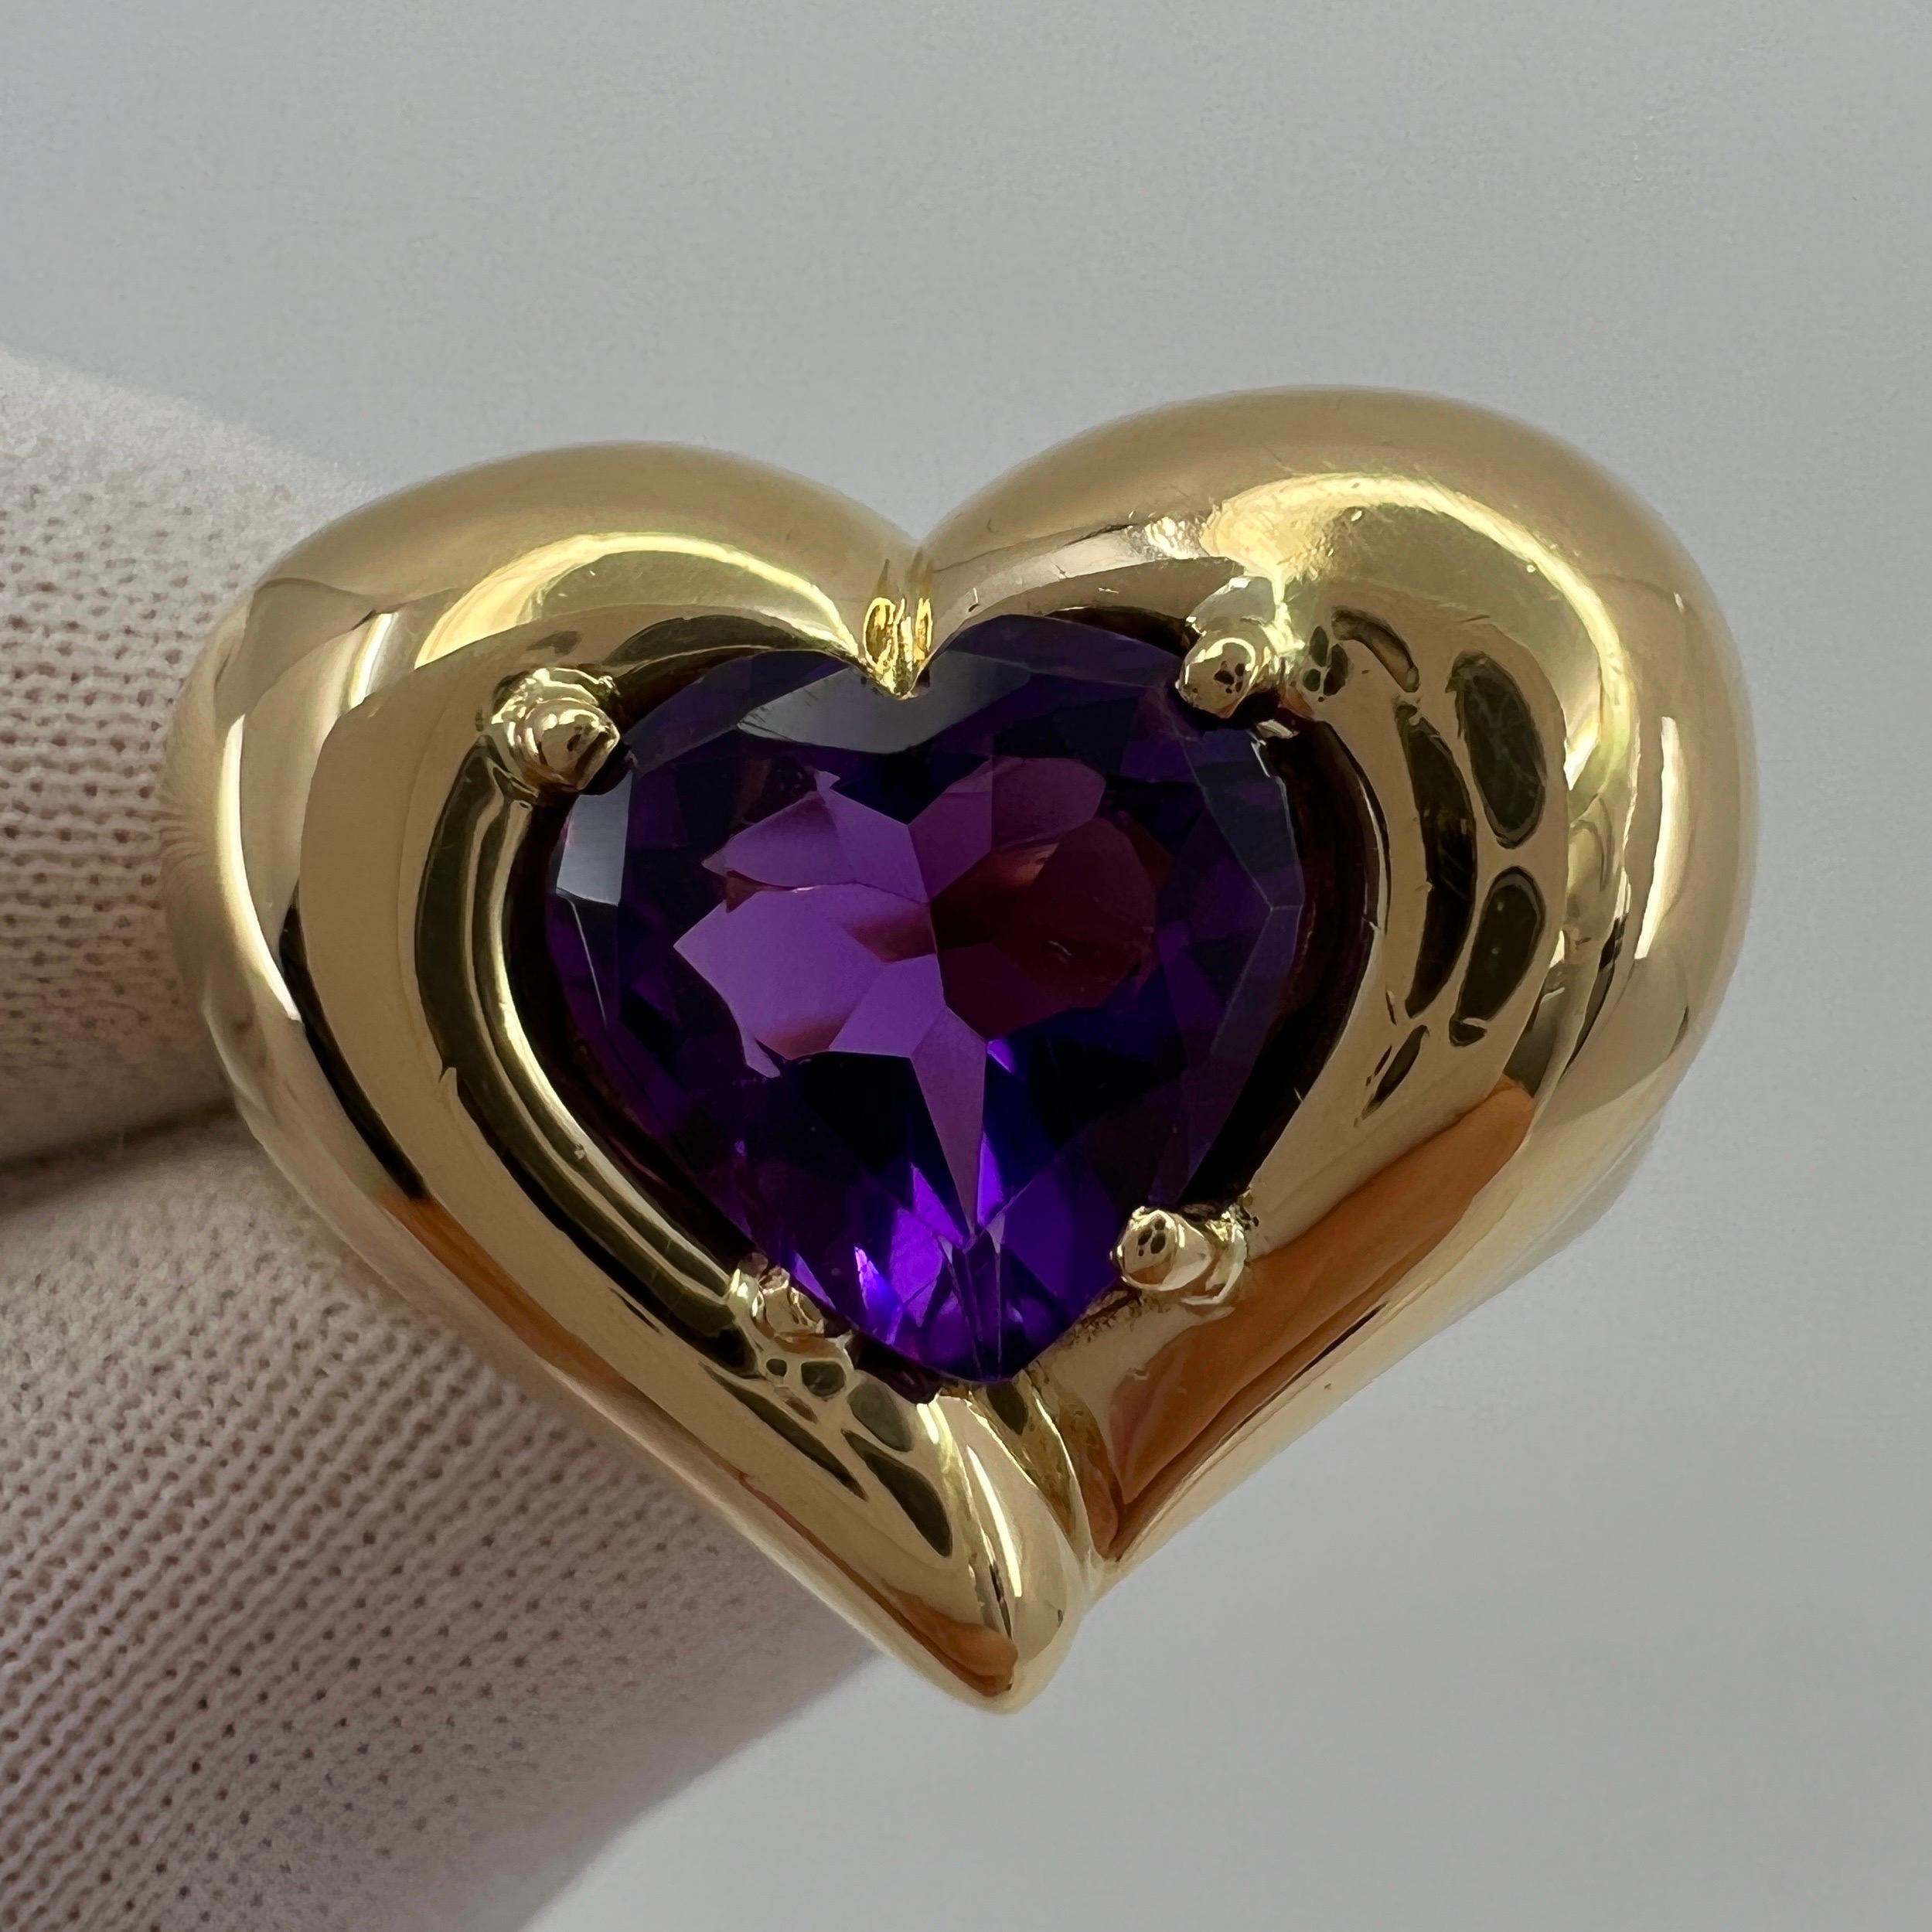 Rare Vintage Van Cleef & Arpels 18k Yellow Gold Amethyst Heart Ring with Box 8